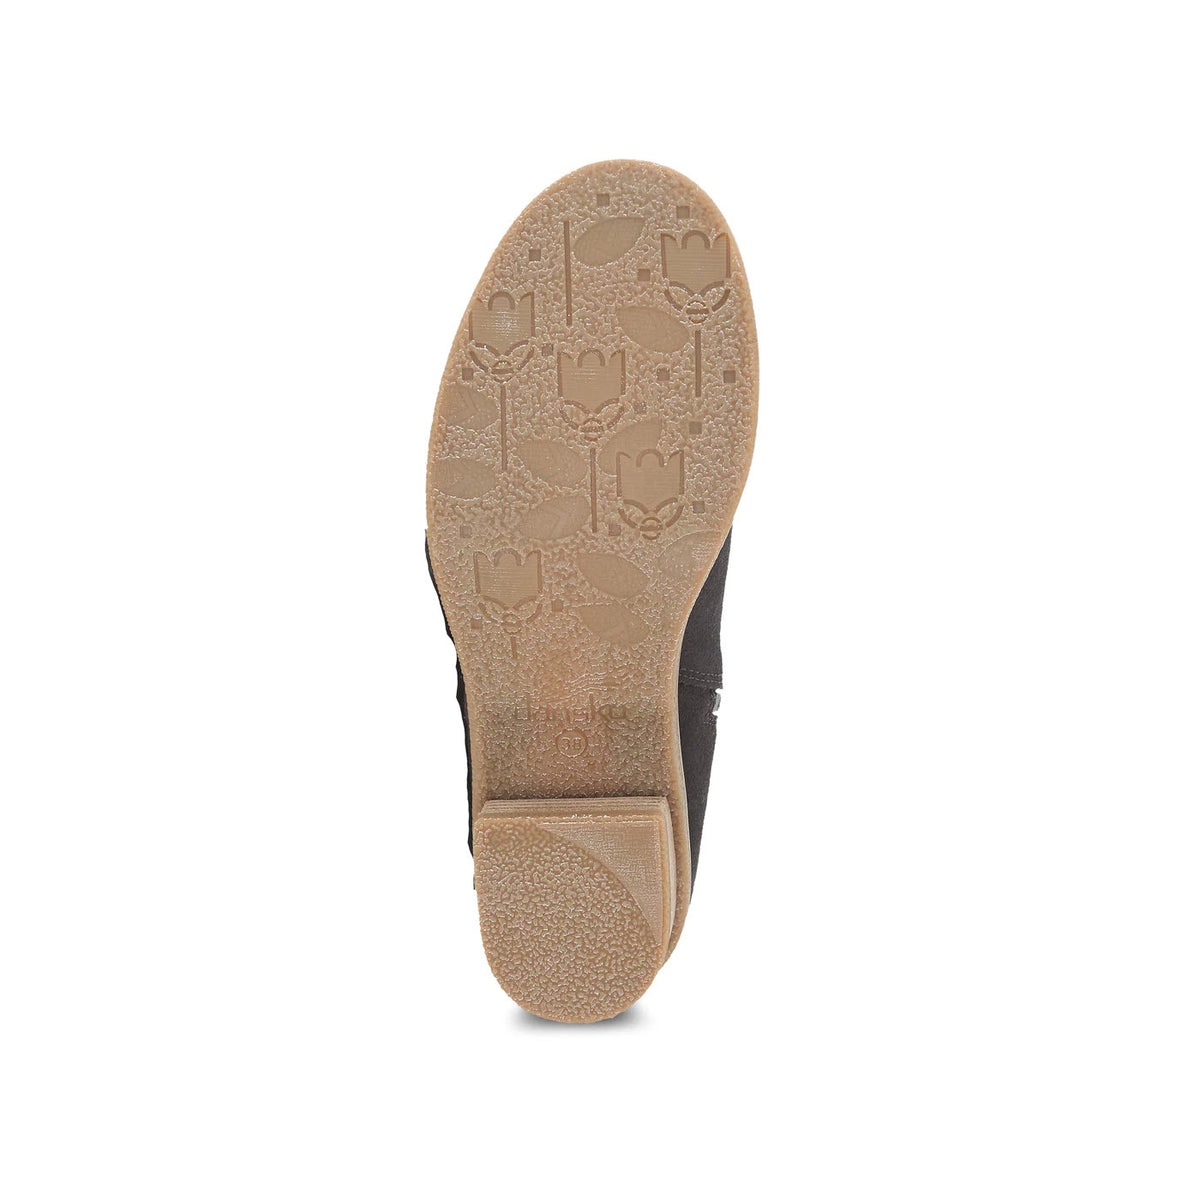 Bottom view of a Dansko Dalinda Chocolate Suede - Womens shoe sole with textured heart and logo patterns, displayed against a white background.